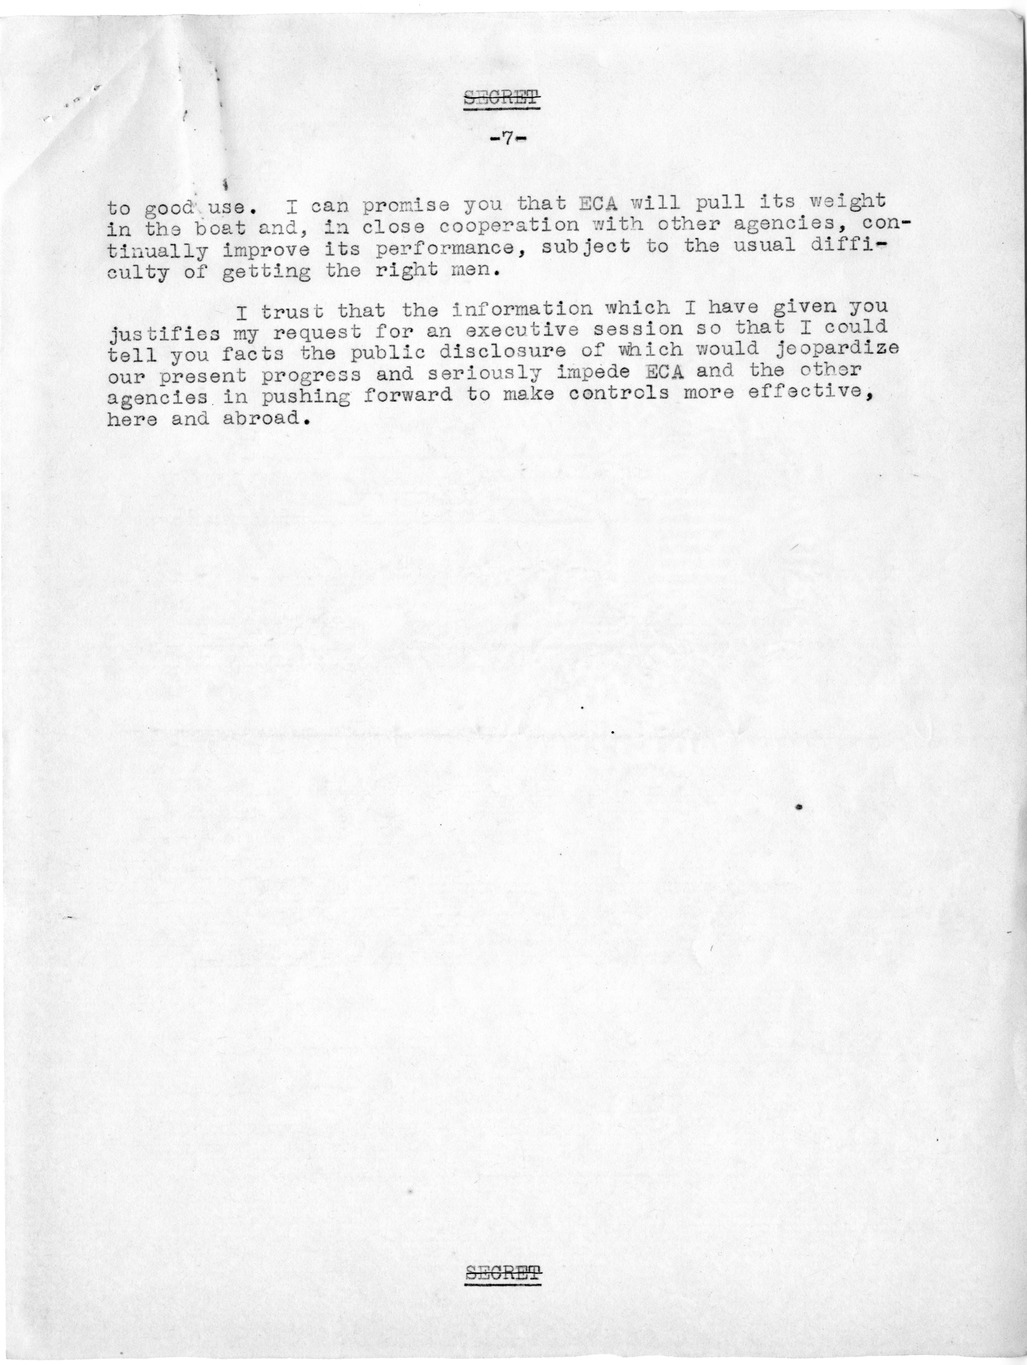 Memorandum from Joseph McDaniel to Paul G. Hoffman, Report on the Treatment of East-West Trade Question in Congressional Presentation, with Attached Draft Report